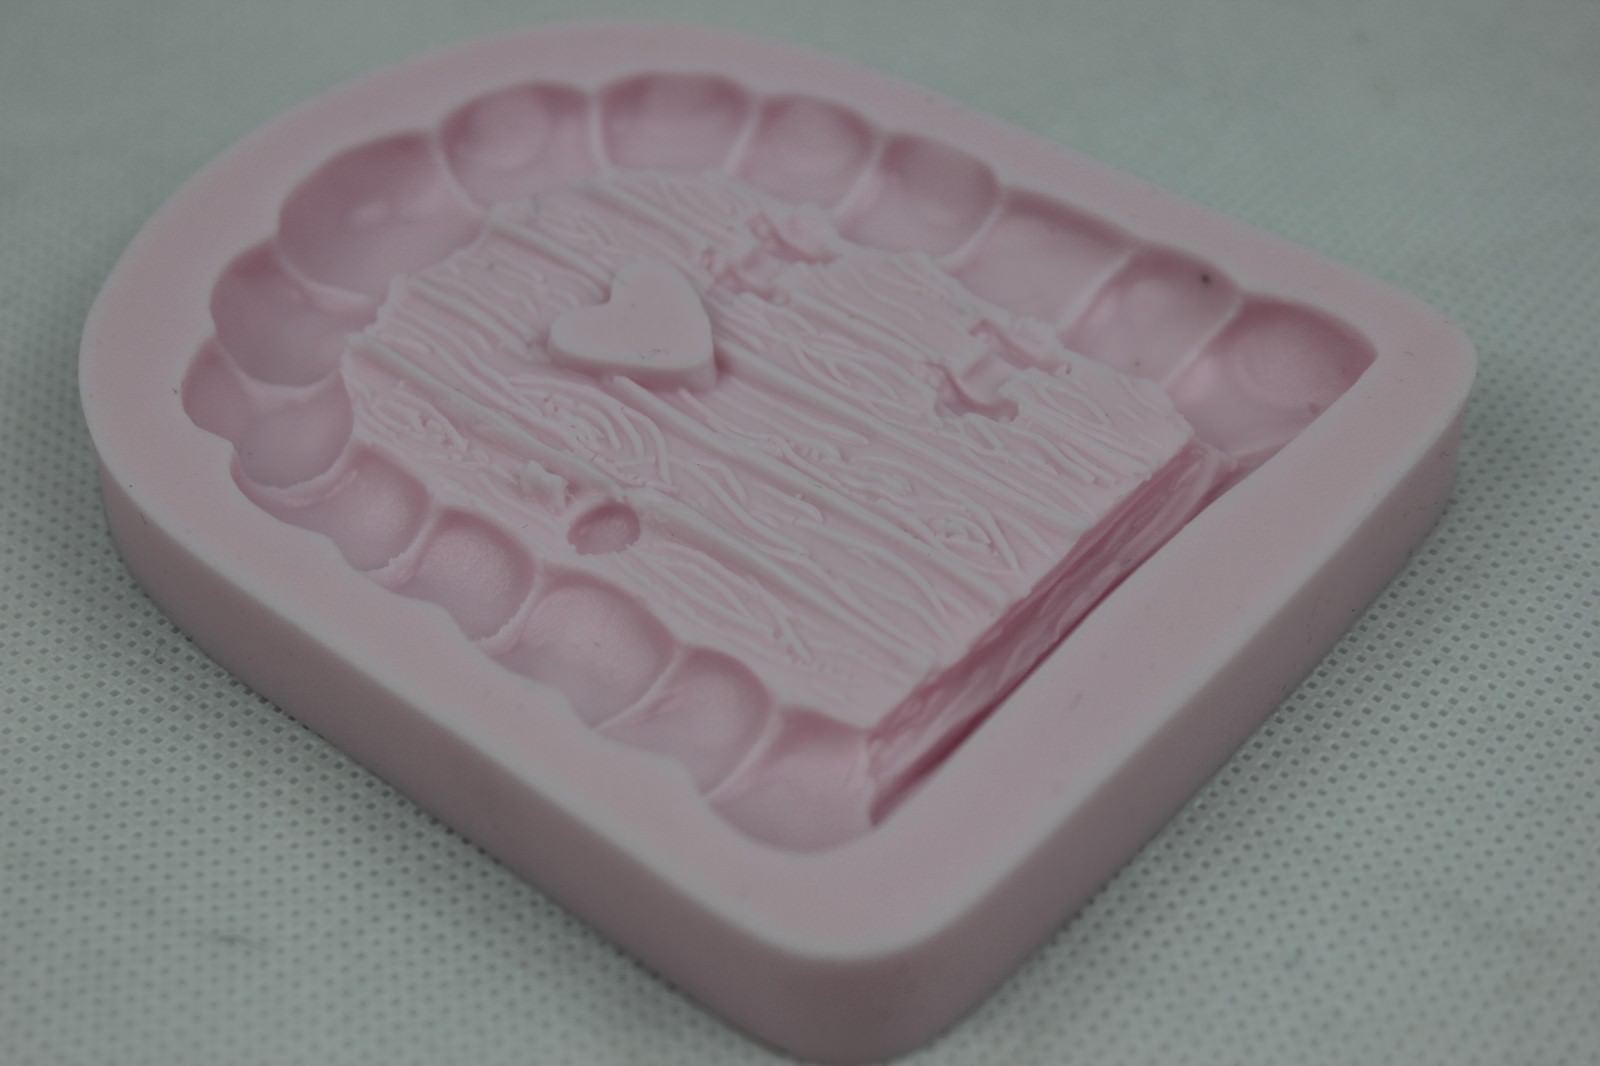 attachment-https://www.cupcakeaddicts.co.uk/wp-content/uploads/imported/3/Fairy-Door-Magical-Silicone-Mould-Cake-Fondant-Chocolate-Icing-Baking-Decor-323147558093-6.jpg